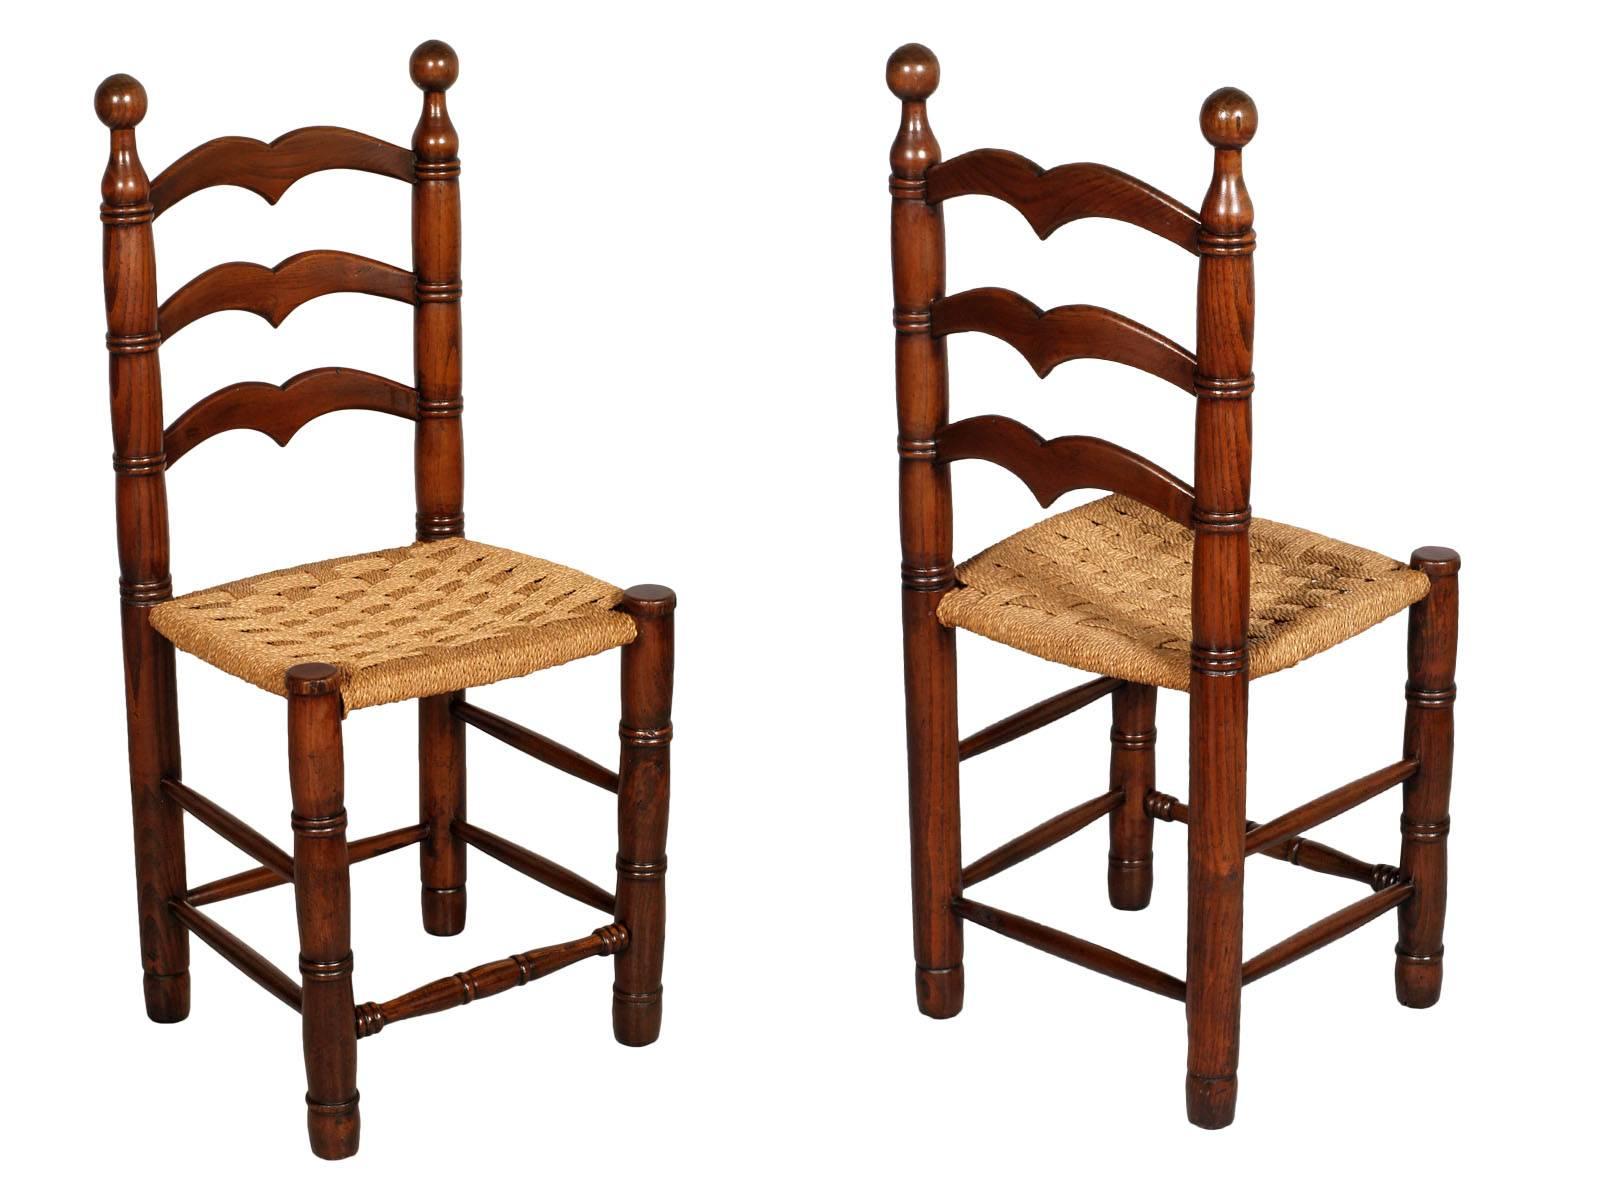 IMPORTANT: THERE ARE 2 CHAIRS REMAINING
Sturdy and elegant chairs 